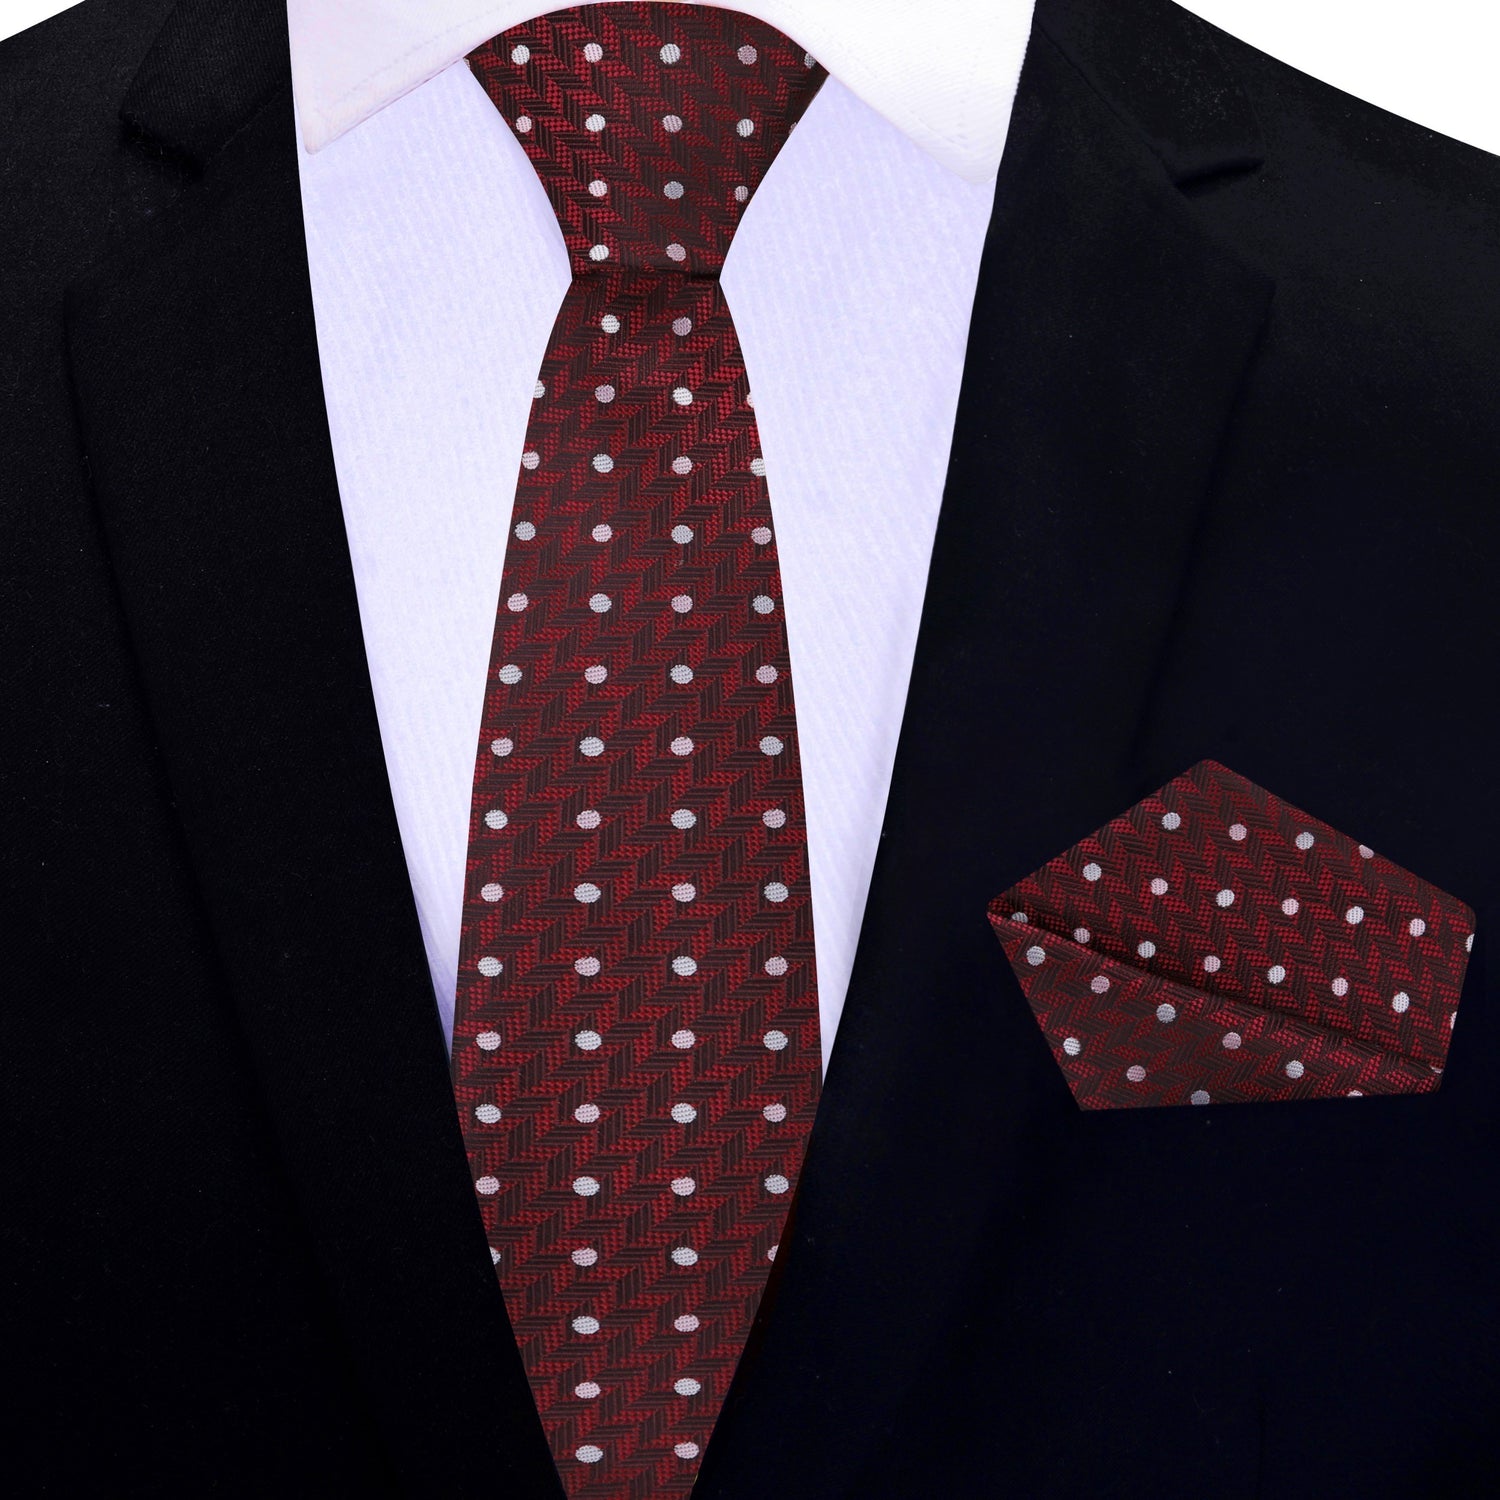 Thin Tie 2: Deep Red Herringbone with Dots Silk Necktie and Matching Square